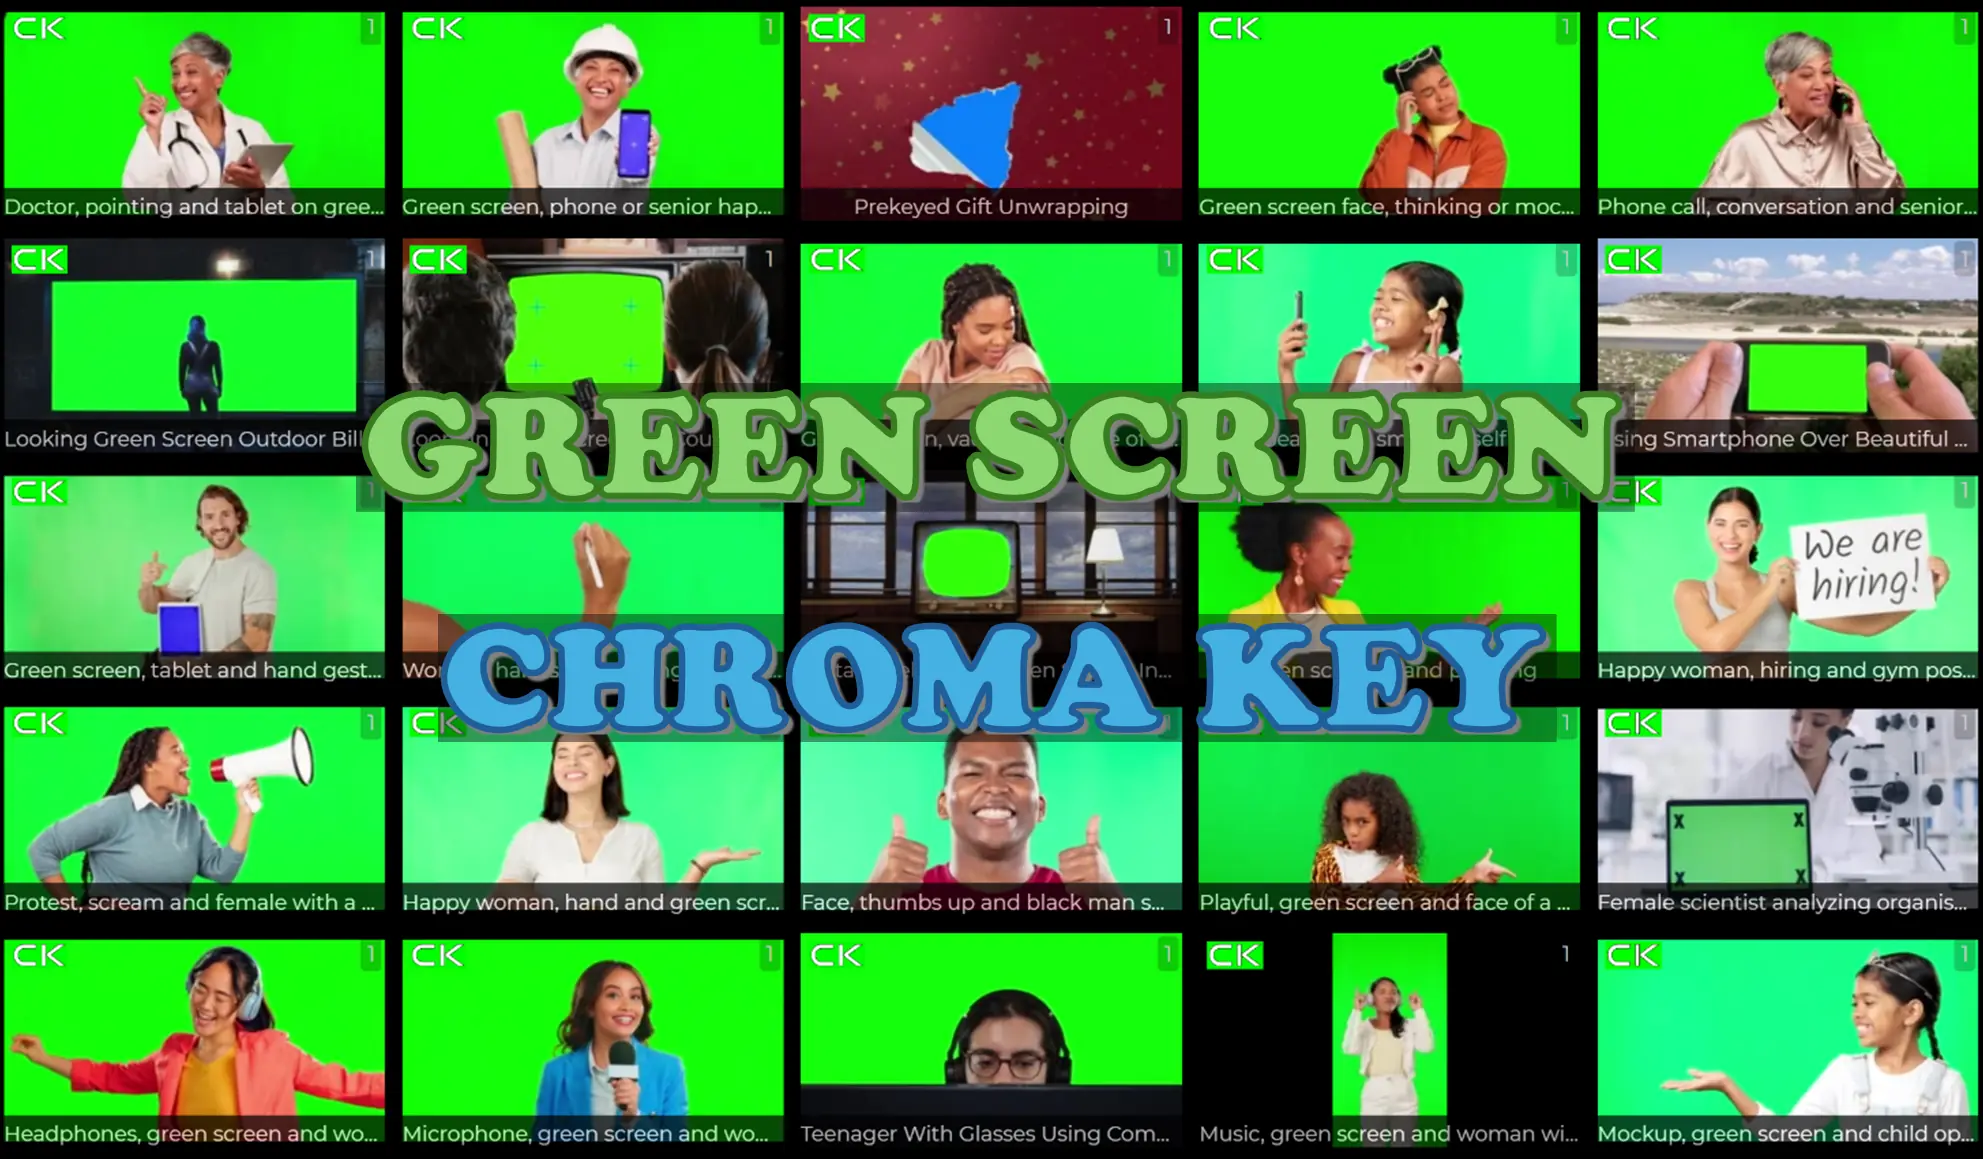 Buy green screen footage and customize it